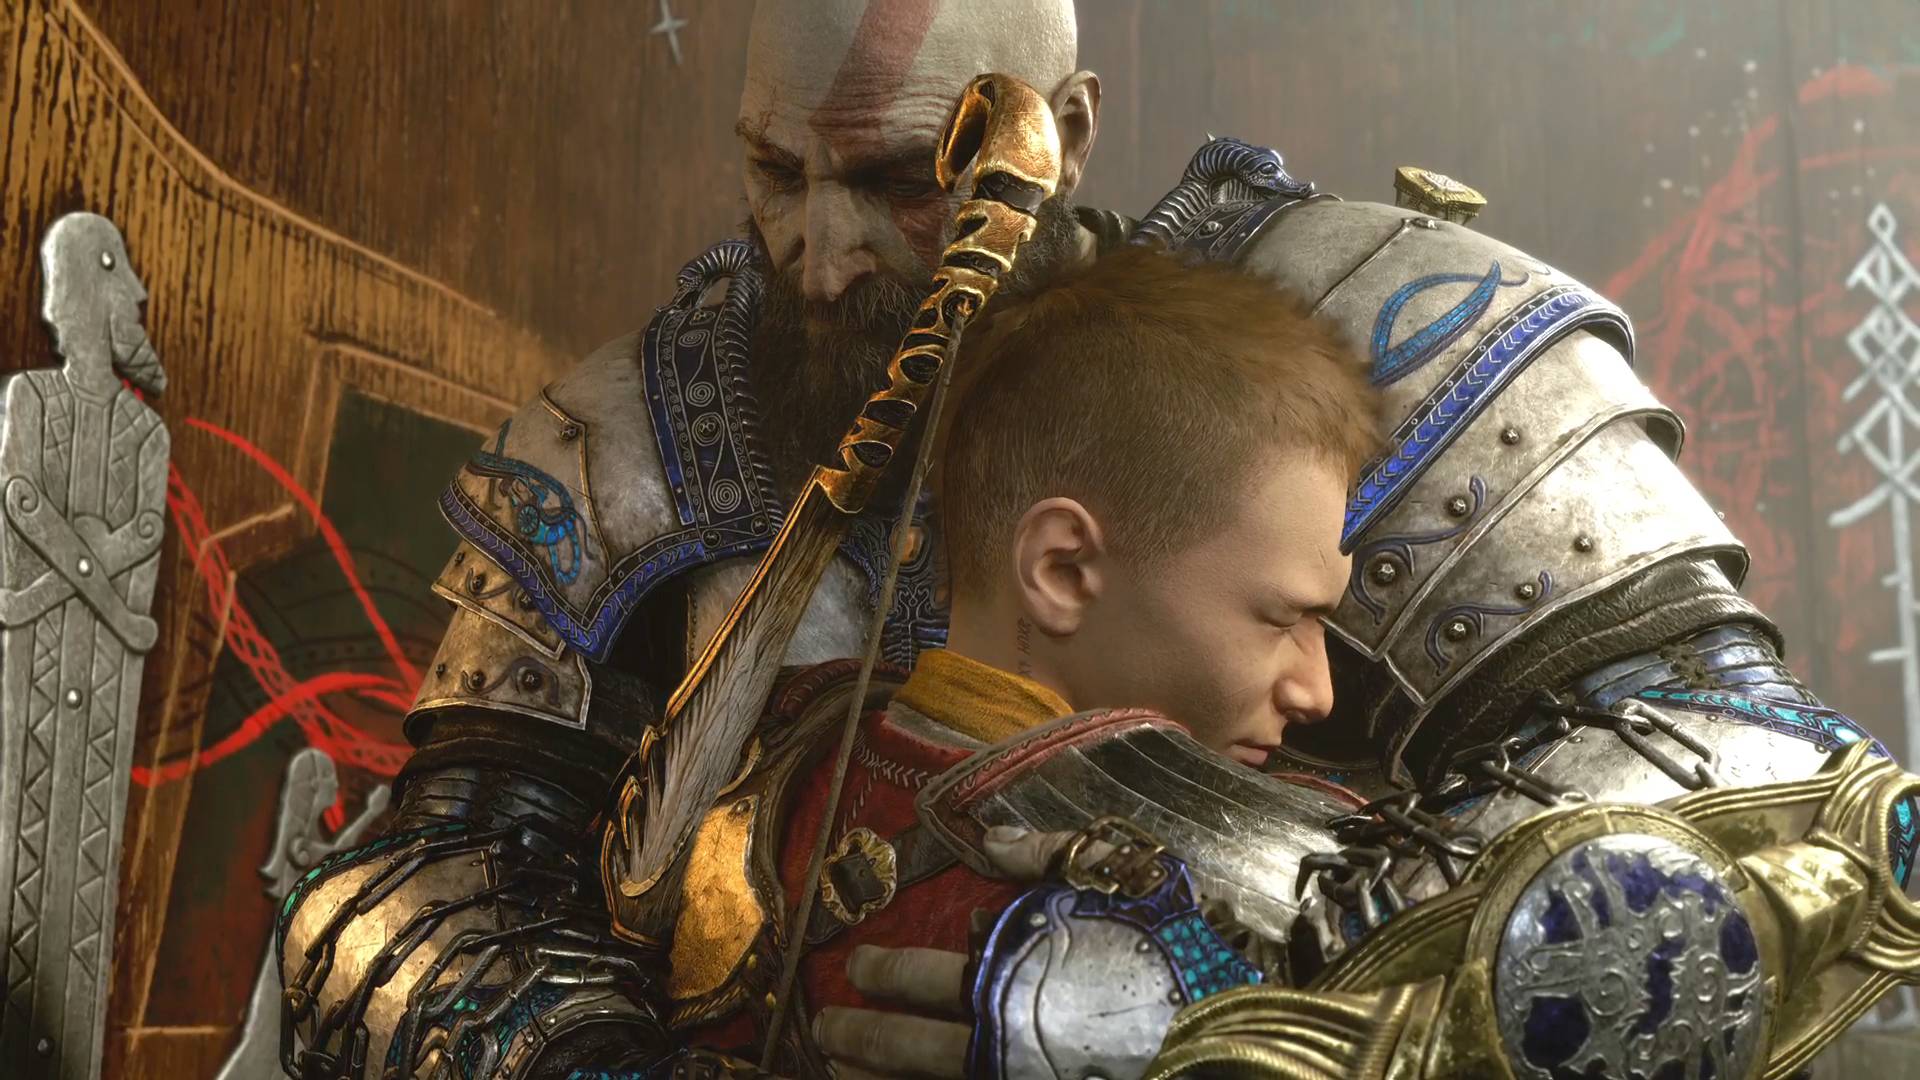 Major God of War Ragnarok character was disguised as an NPC only the director knew about